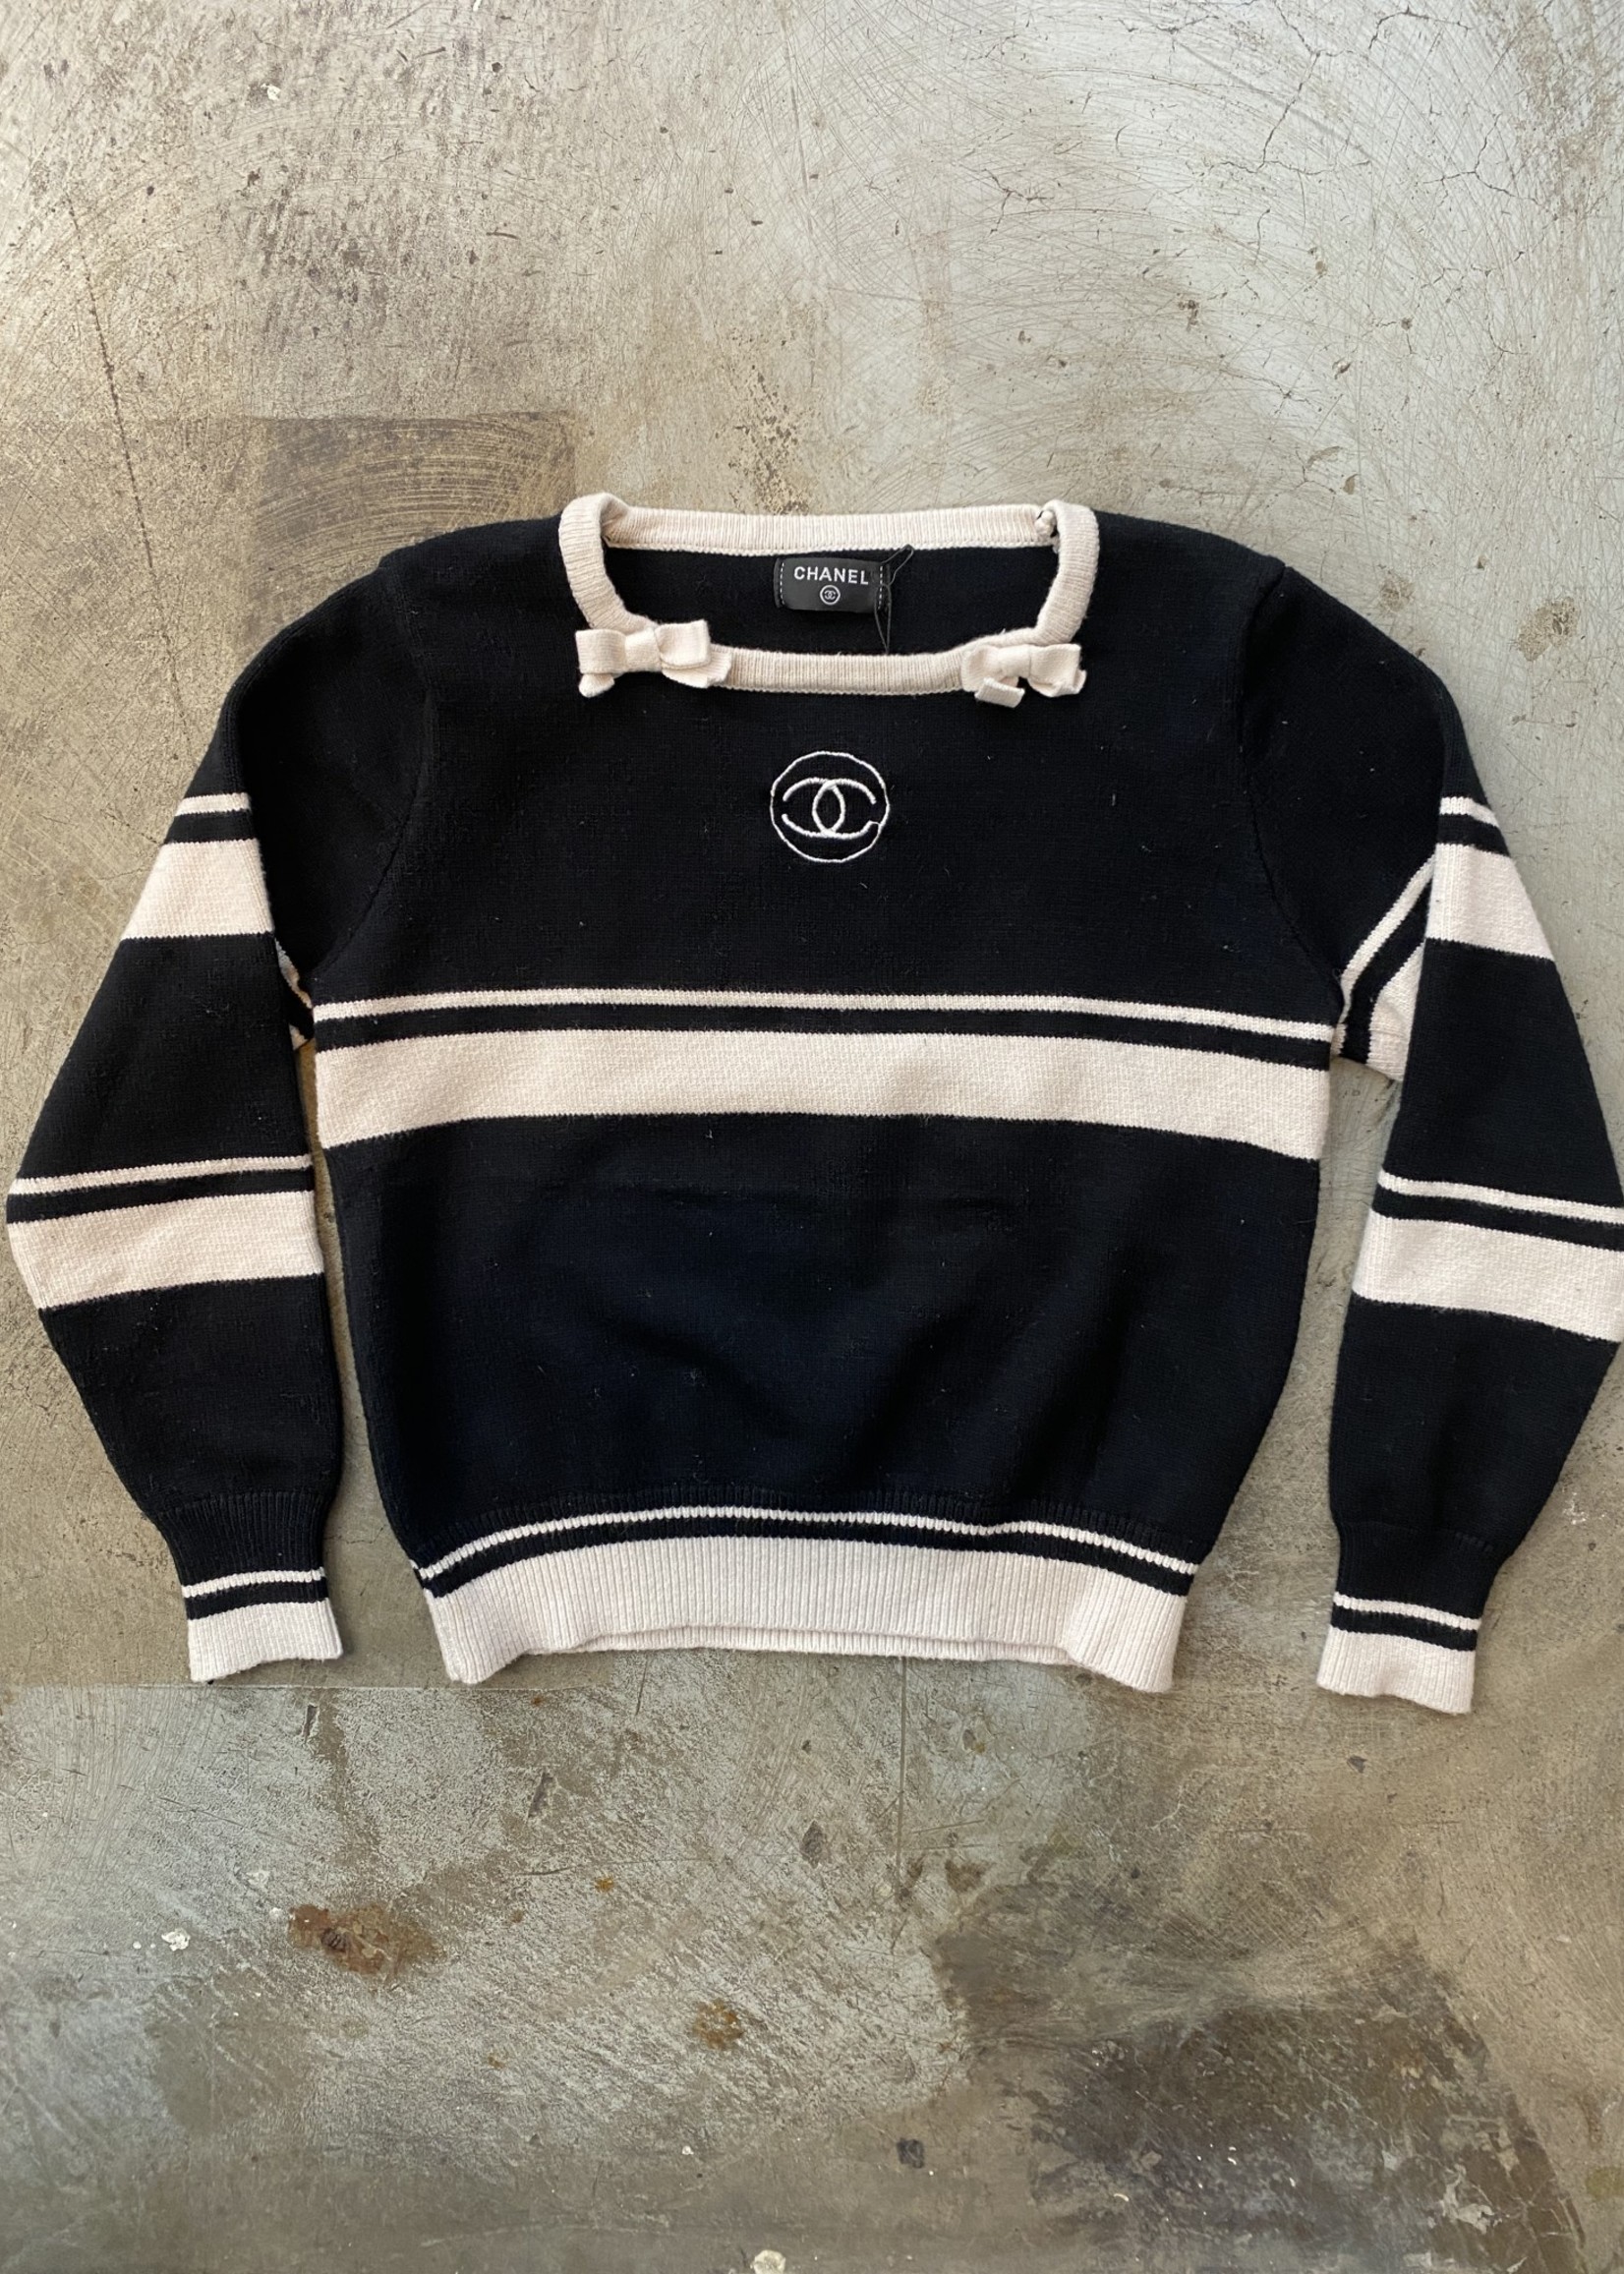 Chanel Dupe Sweater S